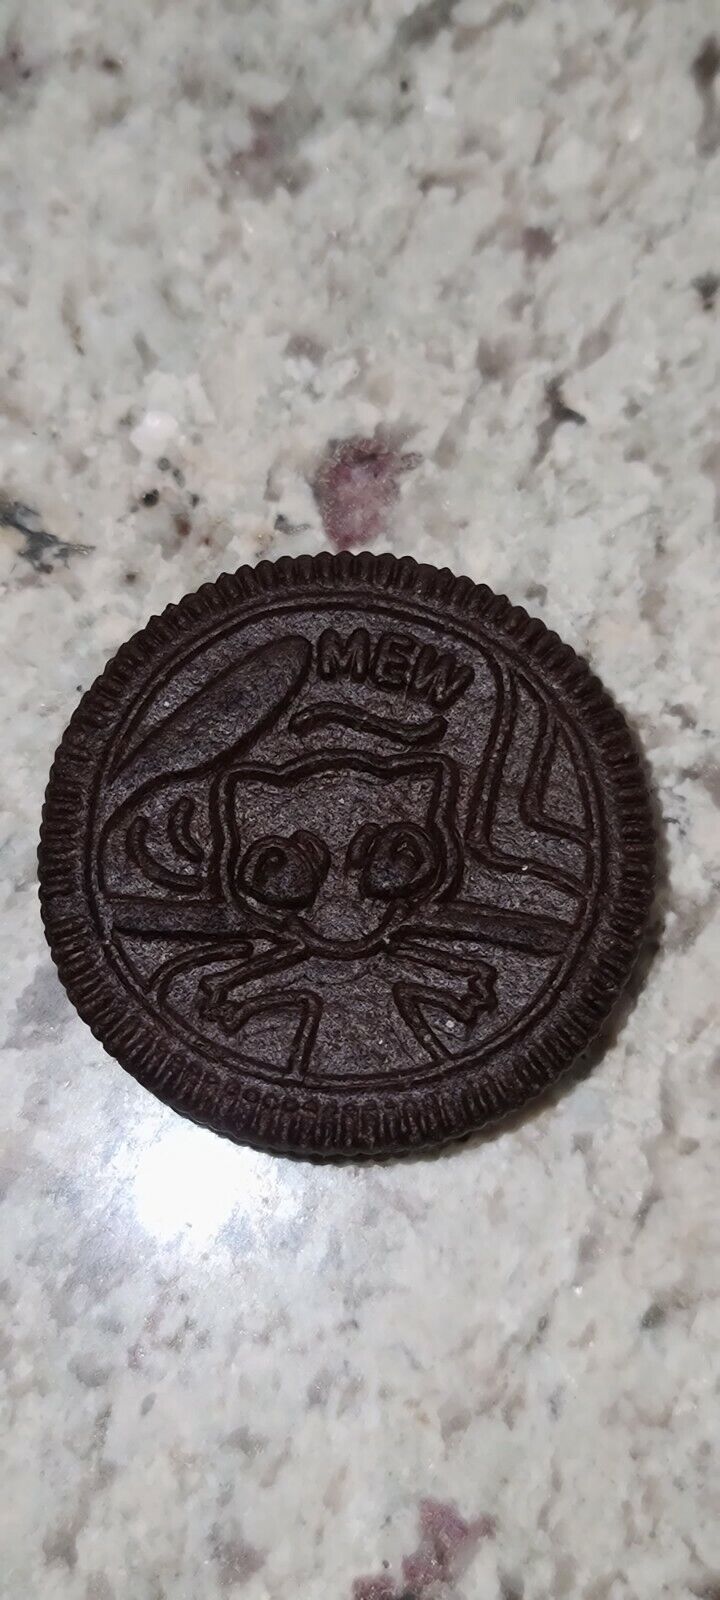 LIMITED EDITION EXTREMELY RARE Mew Oreo Cookie Perfect Condition Collection 